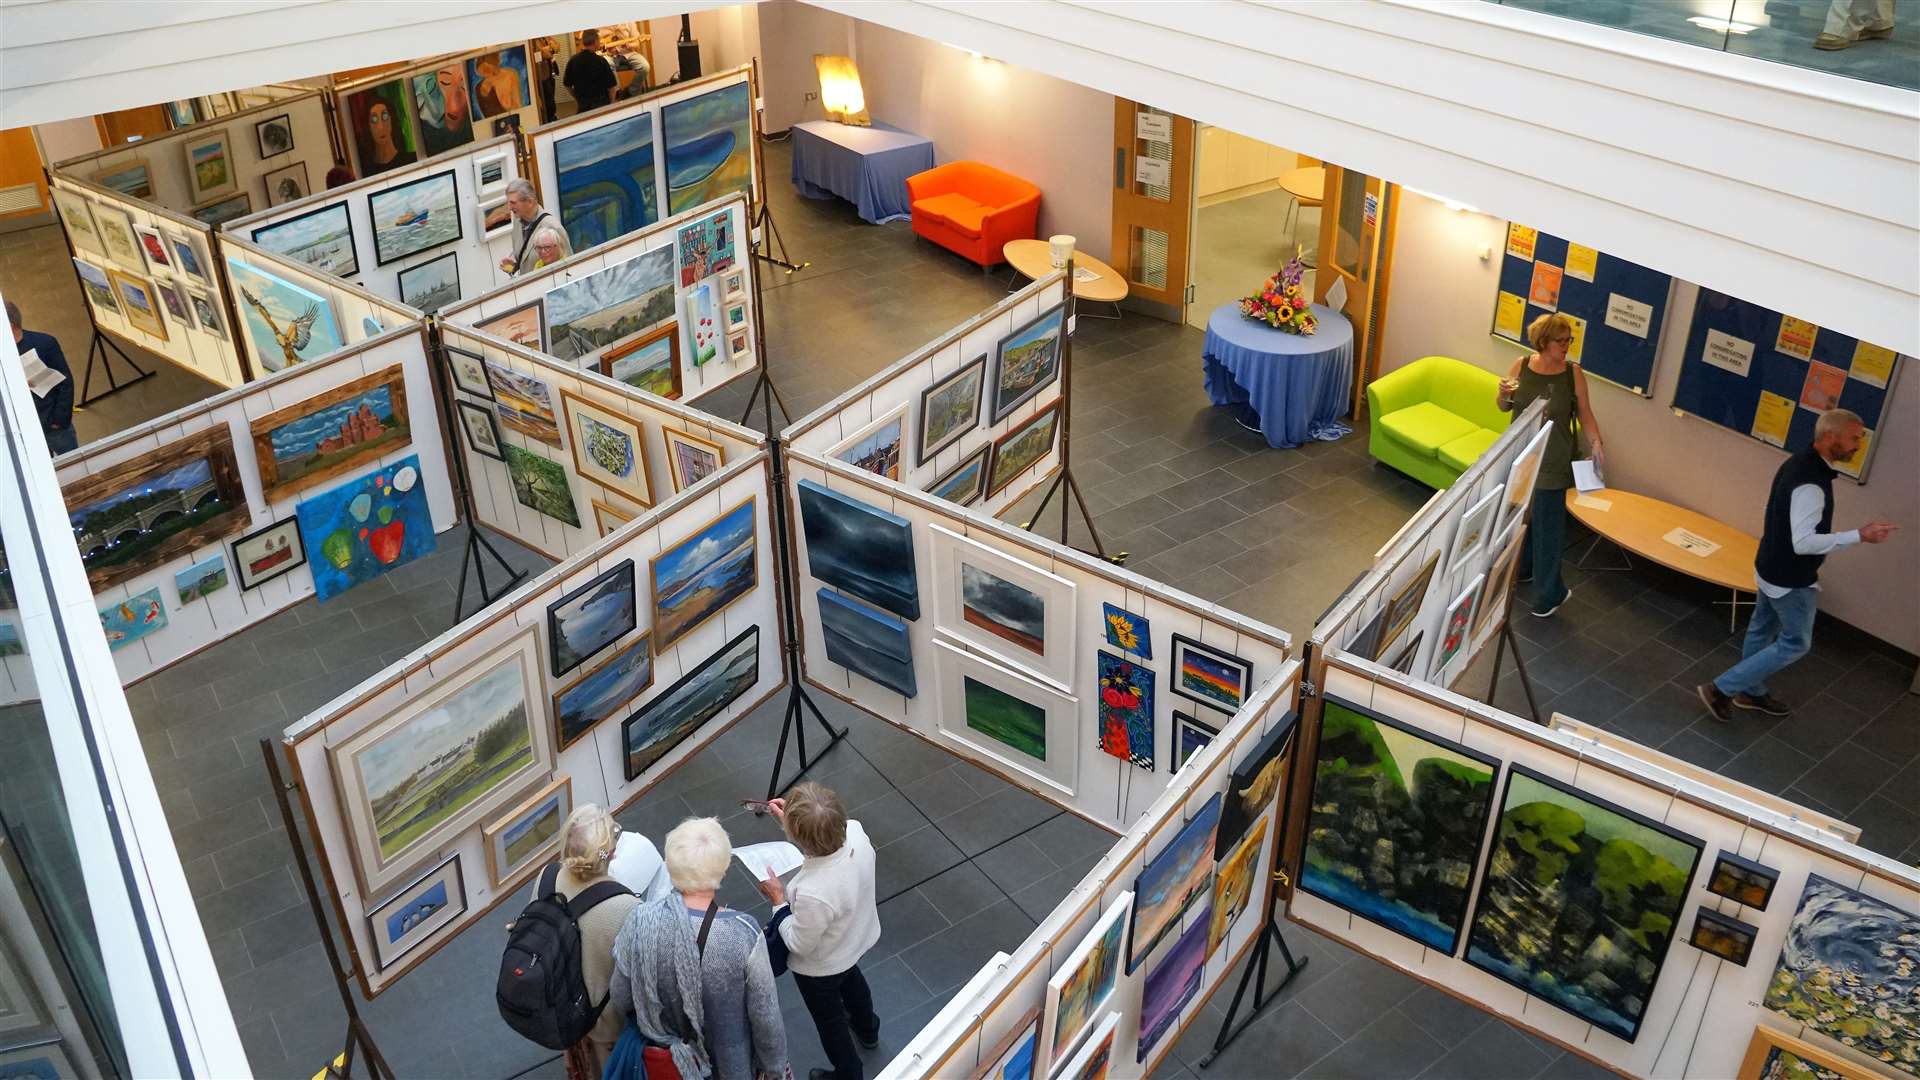 The 2022 show by the Society of Caithness Artists was held in the ETEC building of the Thurso UHI campus. Picture: DGS